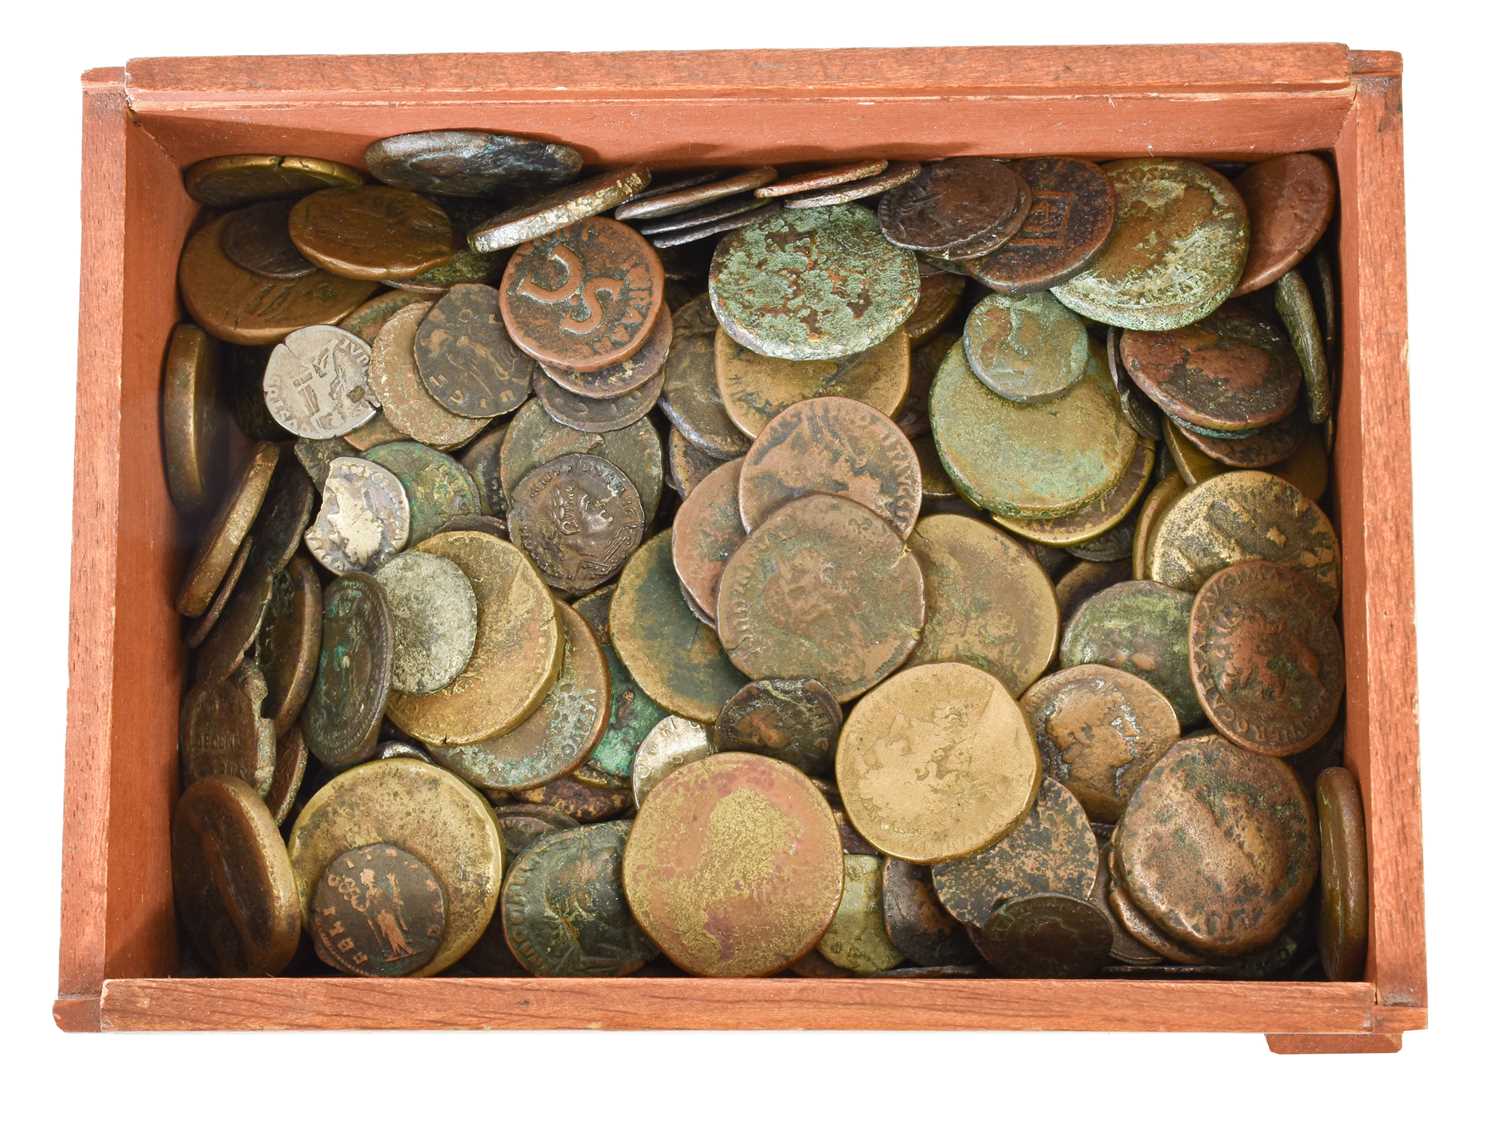 Lot 5 - Mixed Roman Imperial Coinage, approx. 250+...